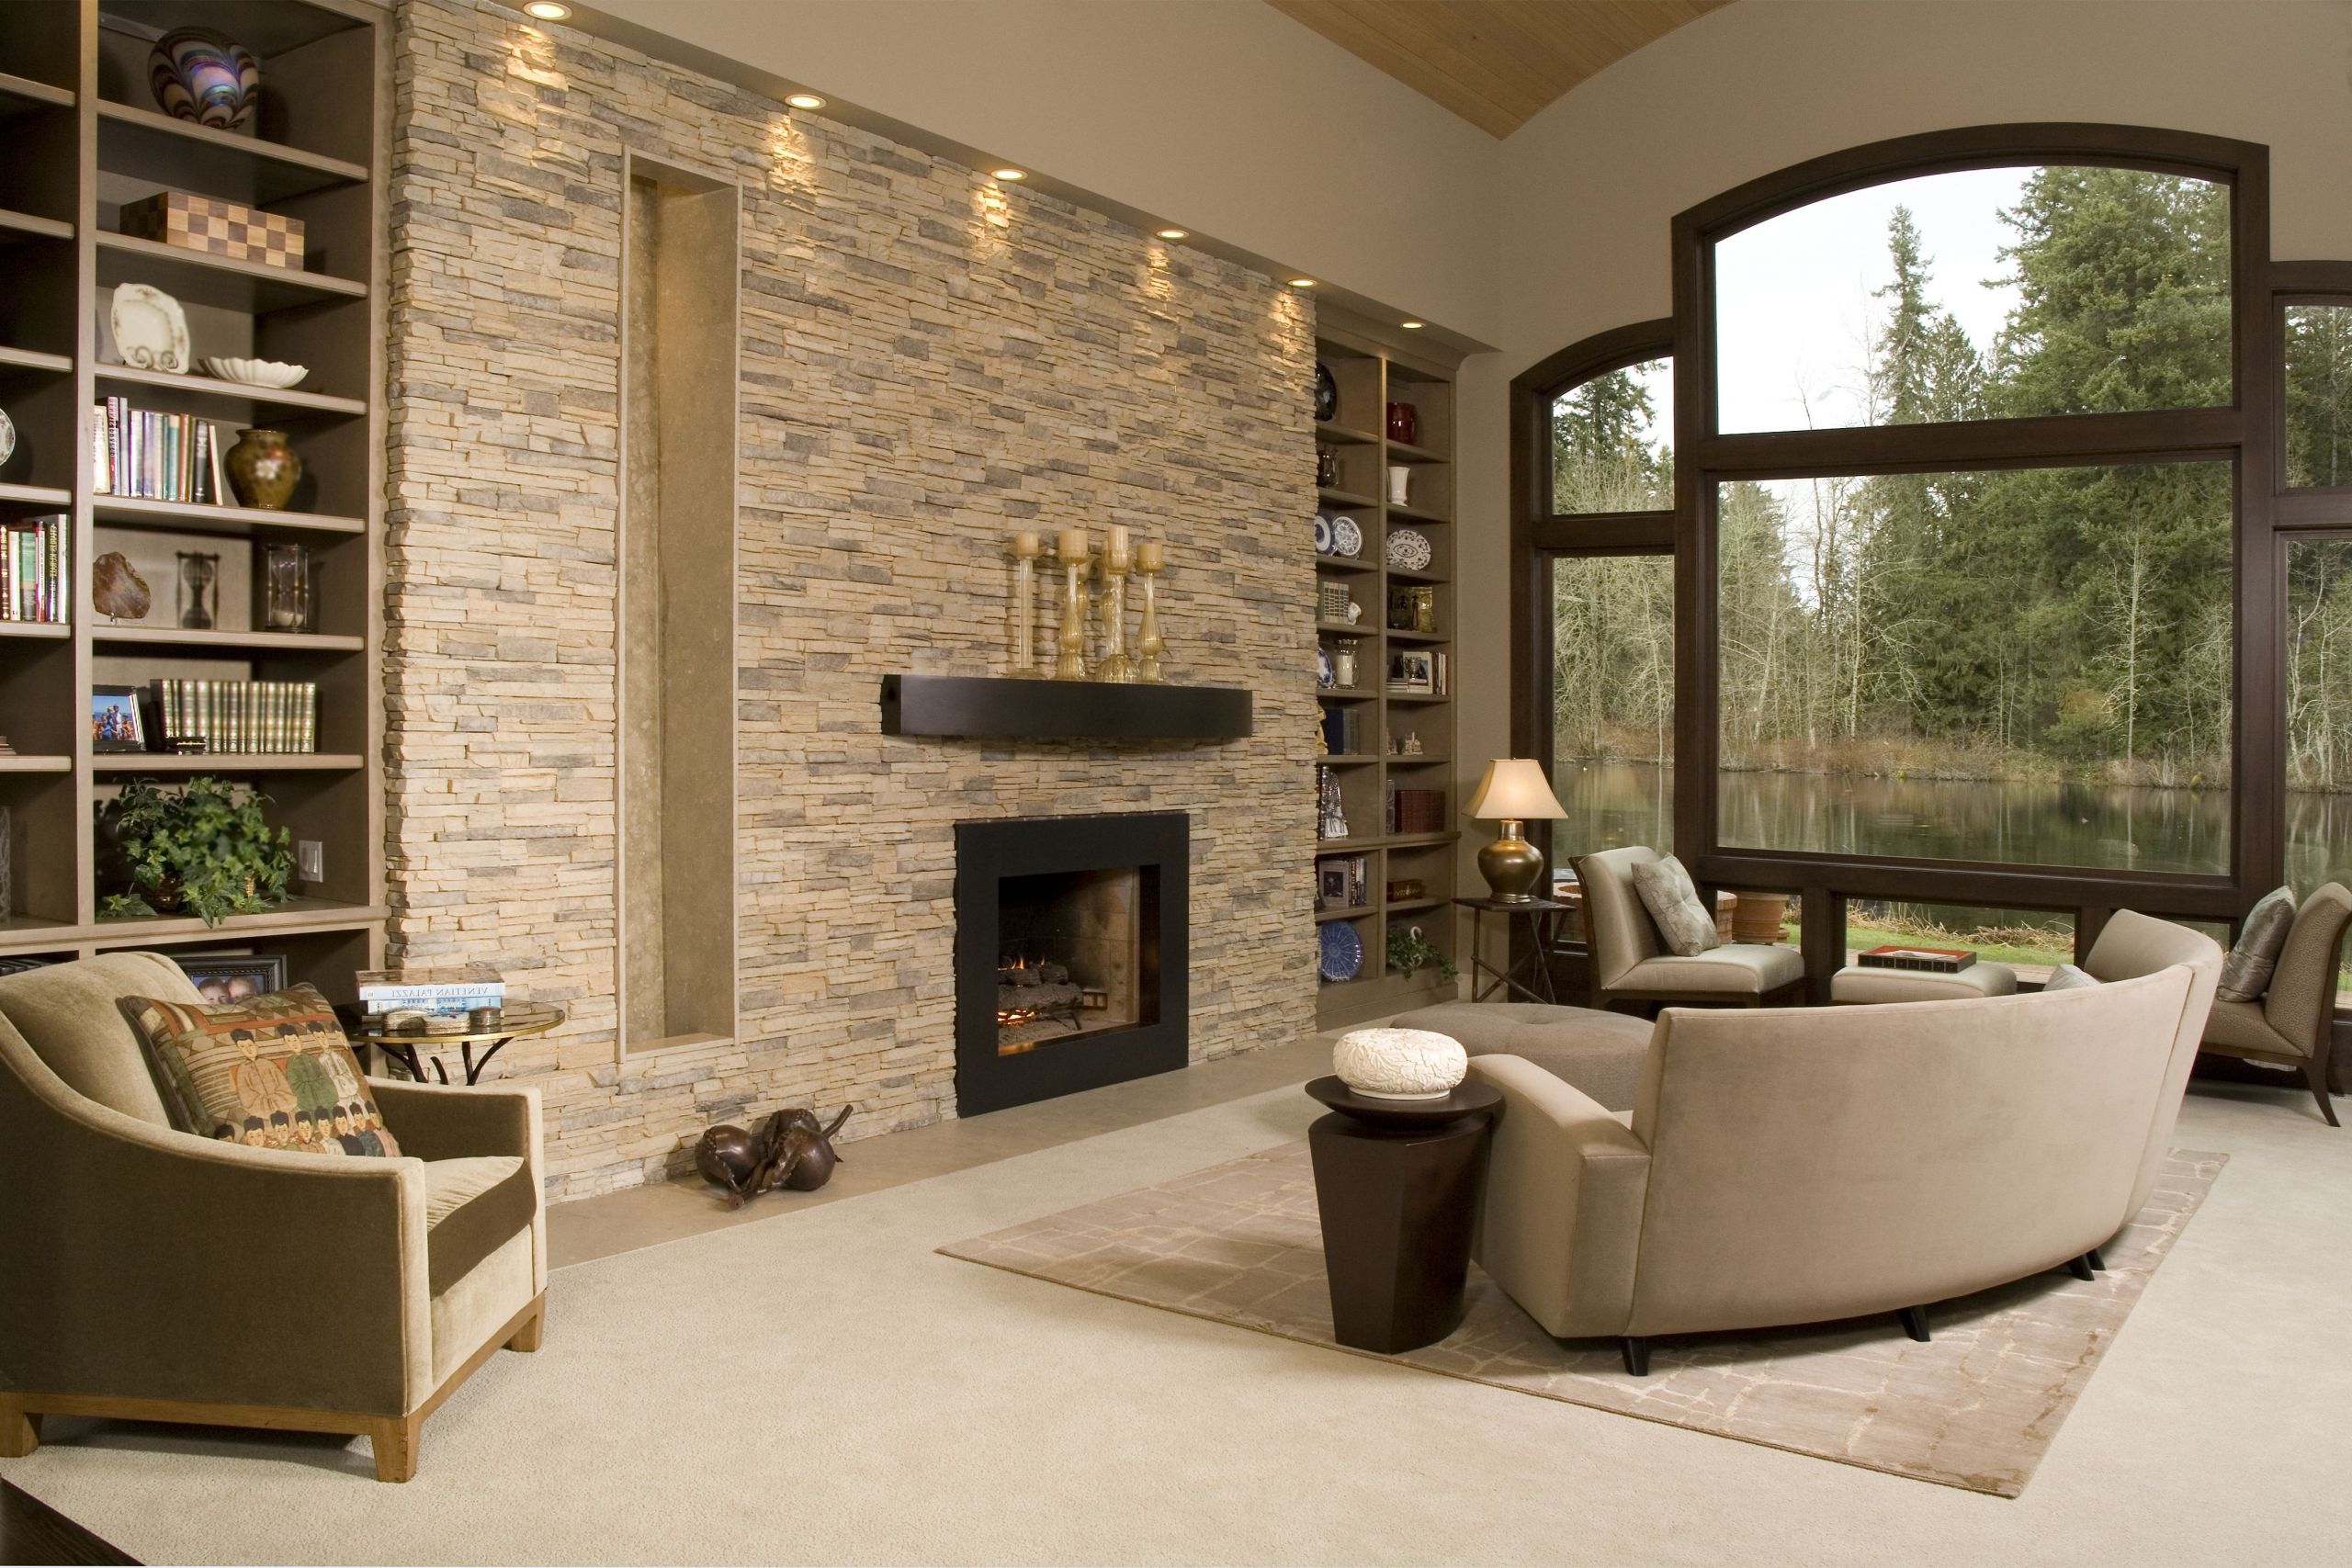 Tile Accent Wall Living Room
 Best 15 of Neutral Color Wall Accents